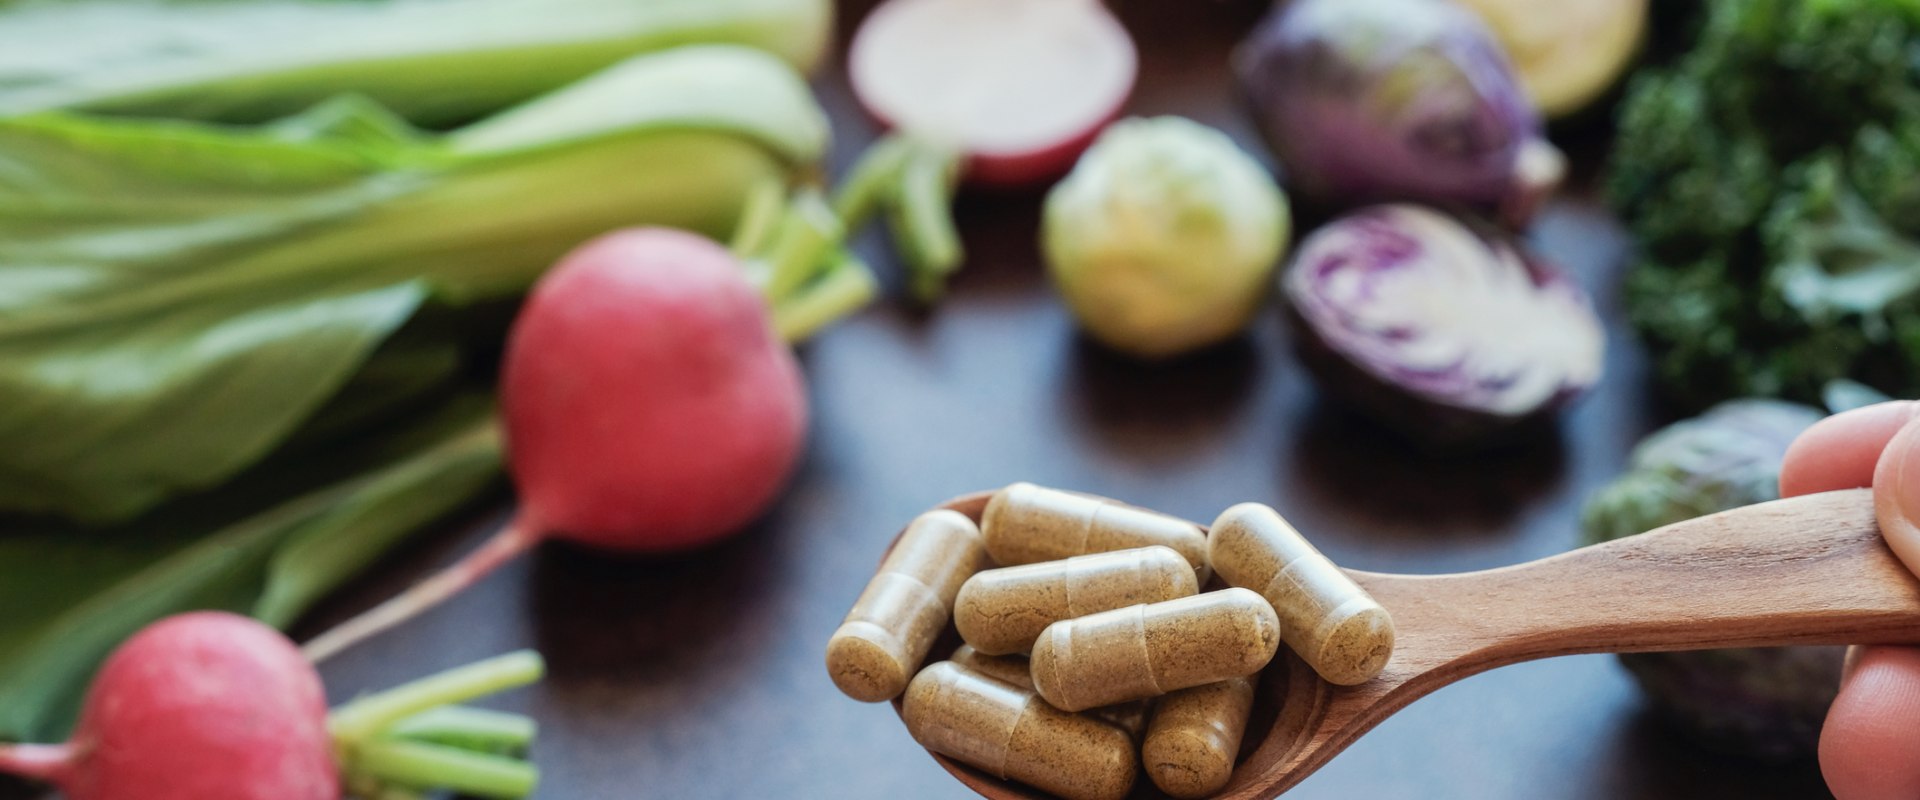 Are Dietary Supplements Better Than Natural Sources of Vitamins and Minerals?